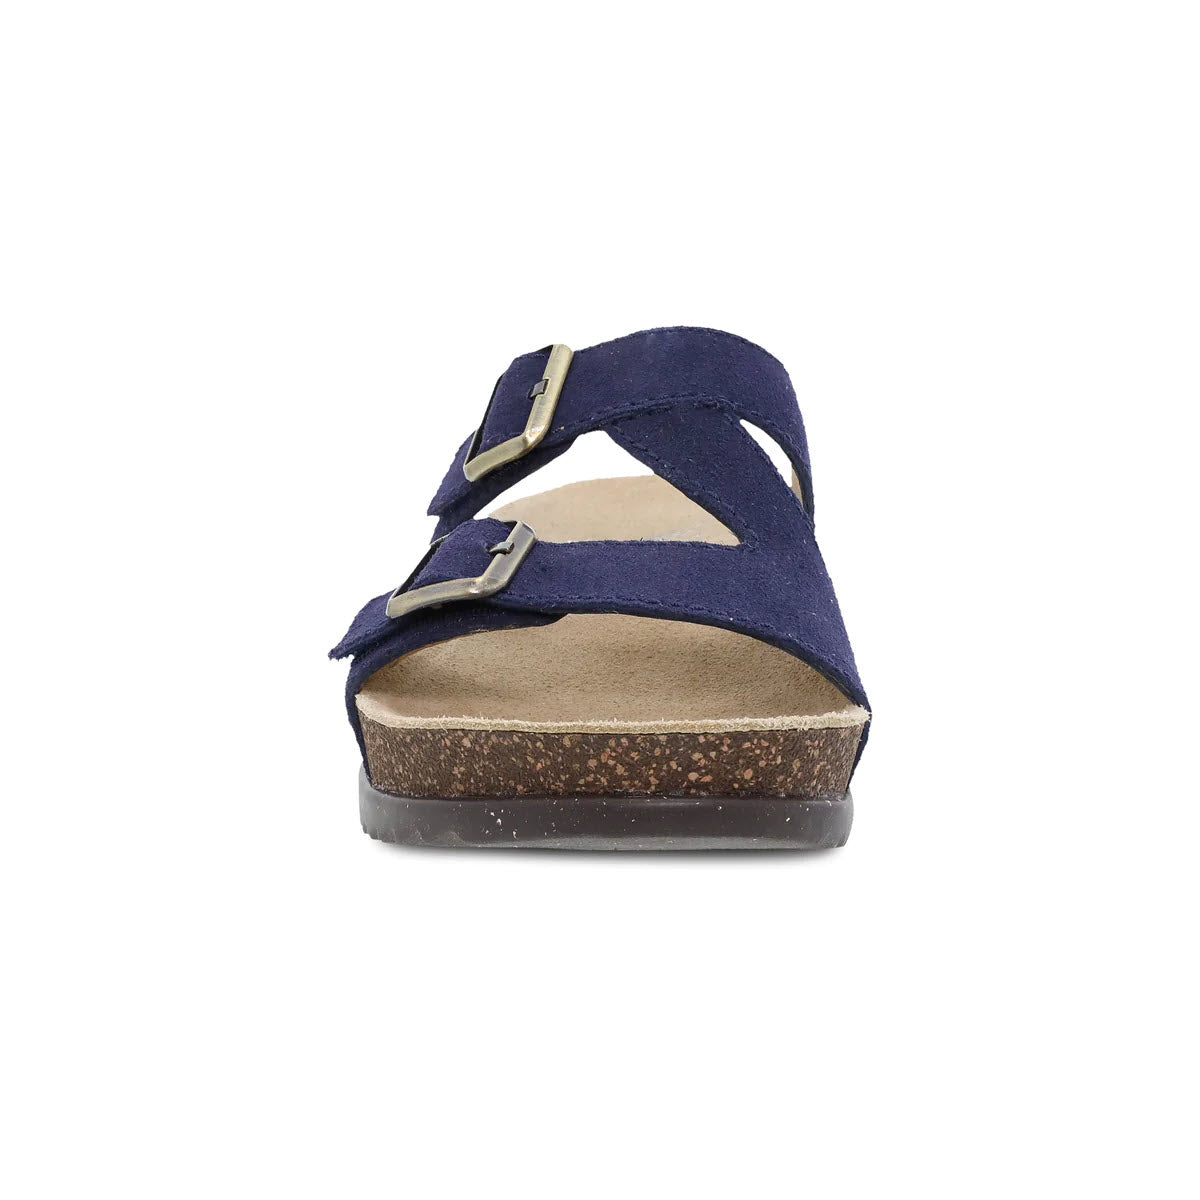 Dansko navy blue double strap slide sandal with buckled straps and a cork sole, isolated on a white background.